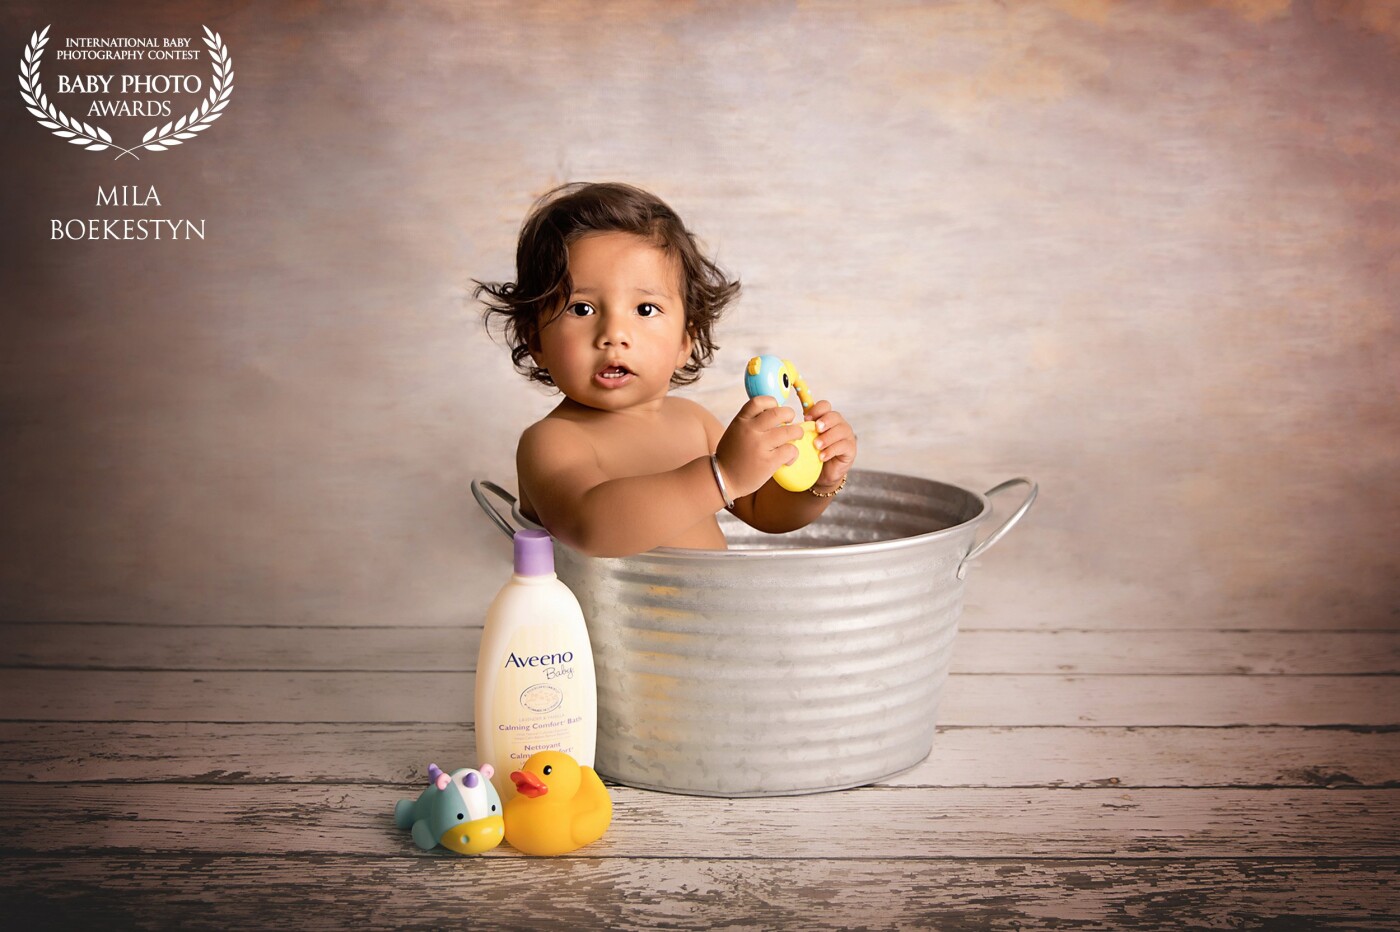 My cake smash sessions all include a bubble bath photos at the very end, with this little guy - we were late to take his 1st-year photos because of COVID... so we did a milestone session as soon as we could, and of course, I have included a bubble bath shot at the very end :-)